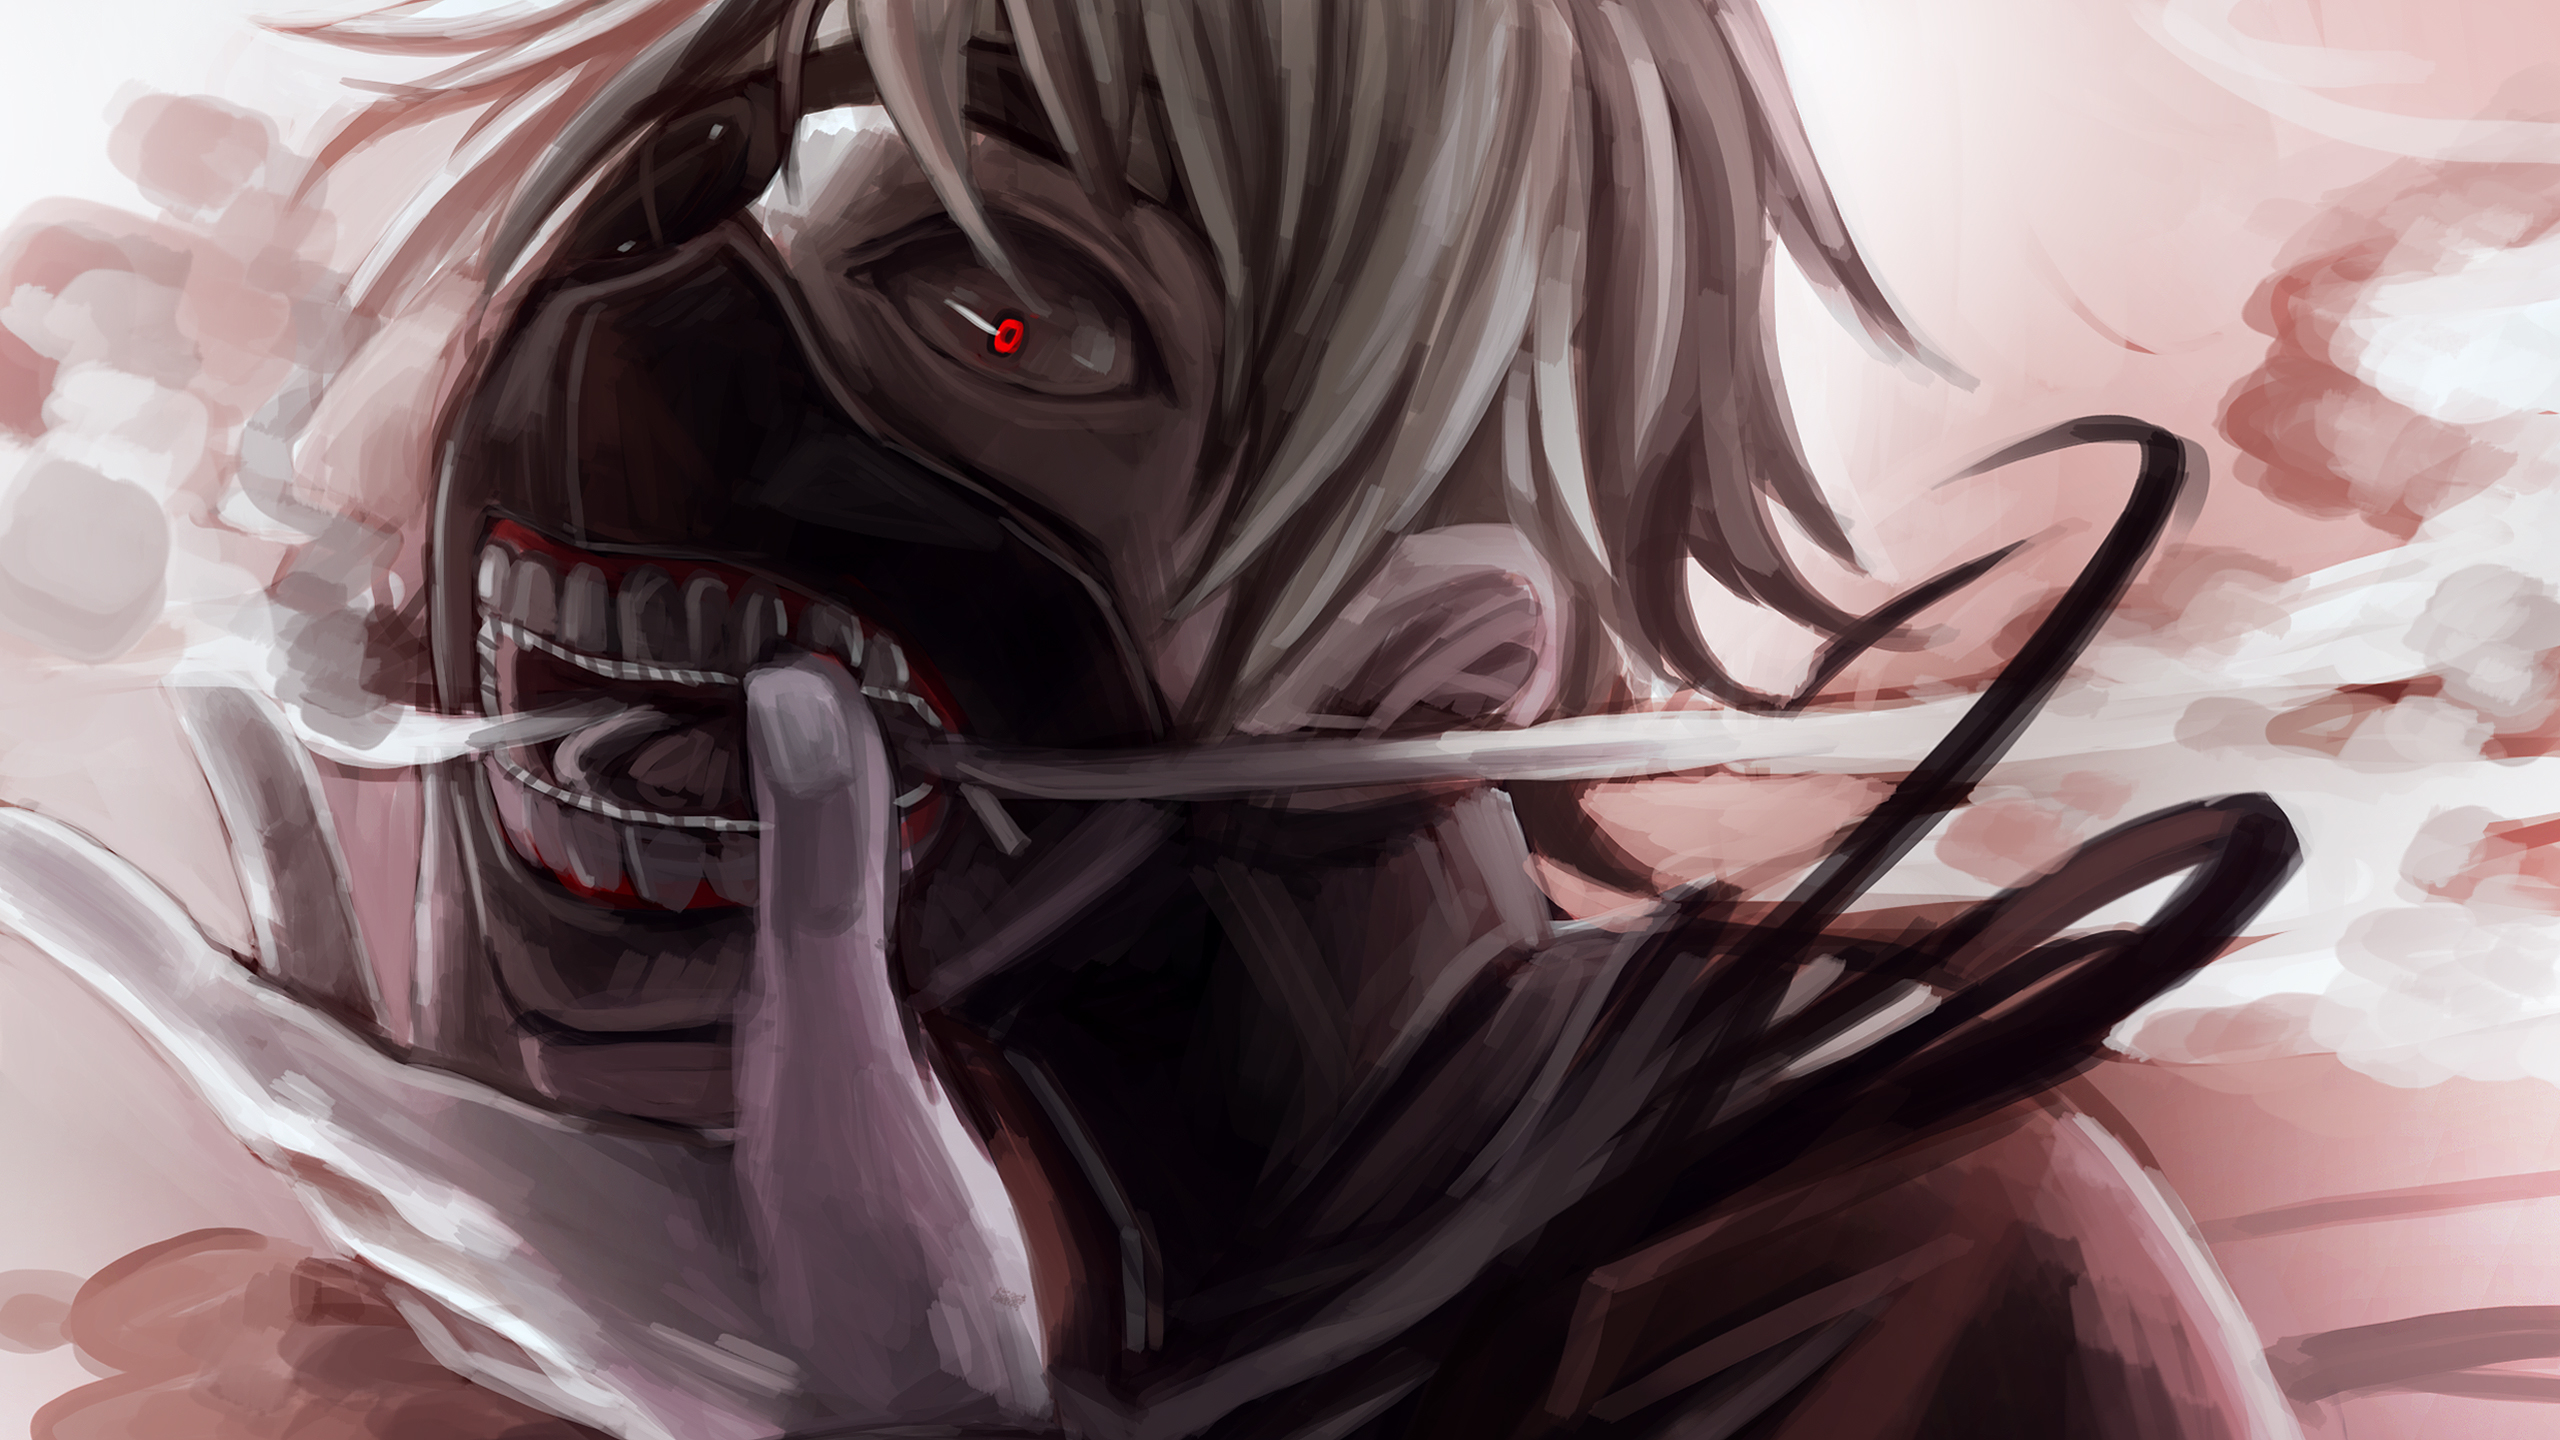 Anime Tokyo Ghoul HD Wallpaper by 4th-reset